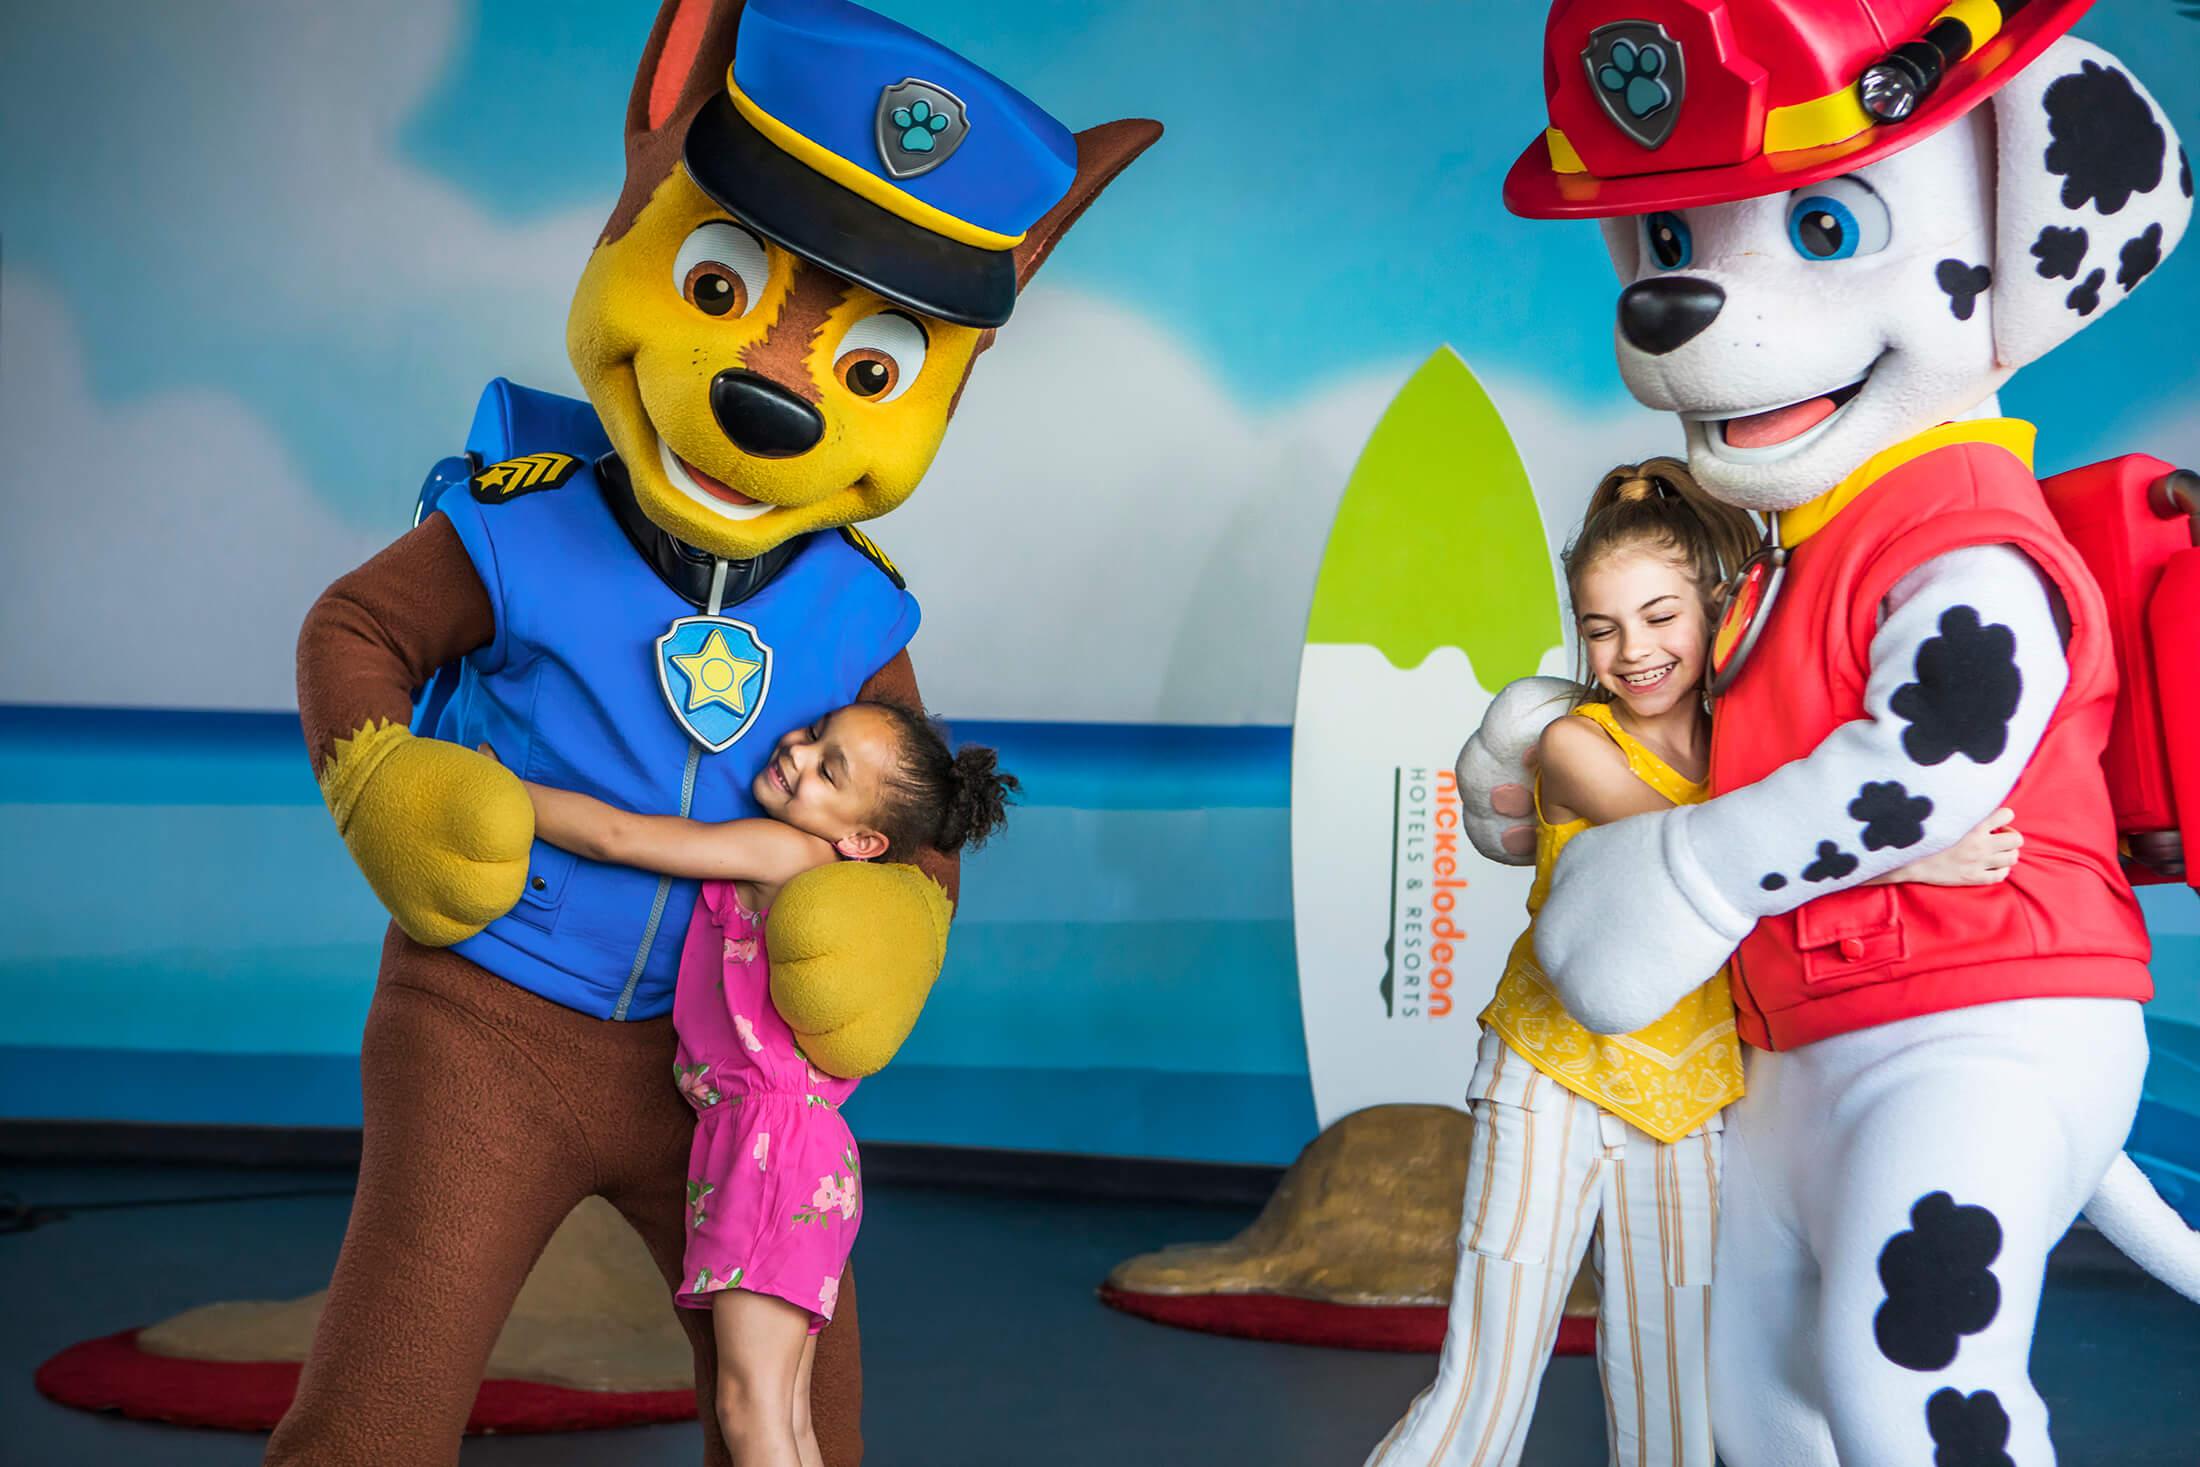 Paw patrol characters posing with child